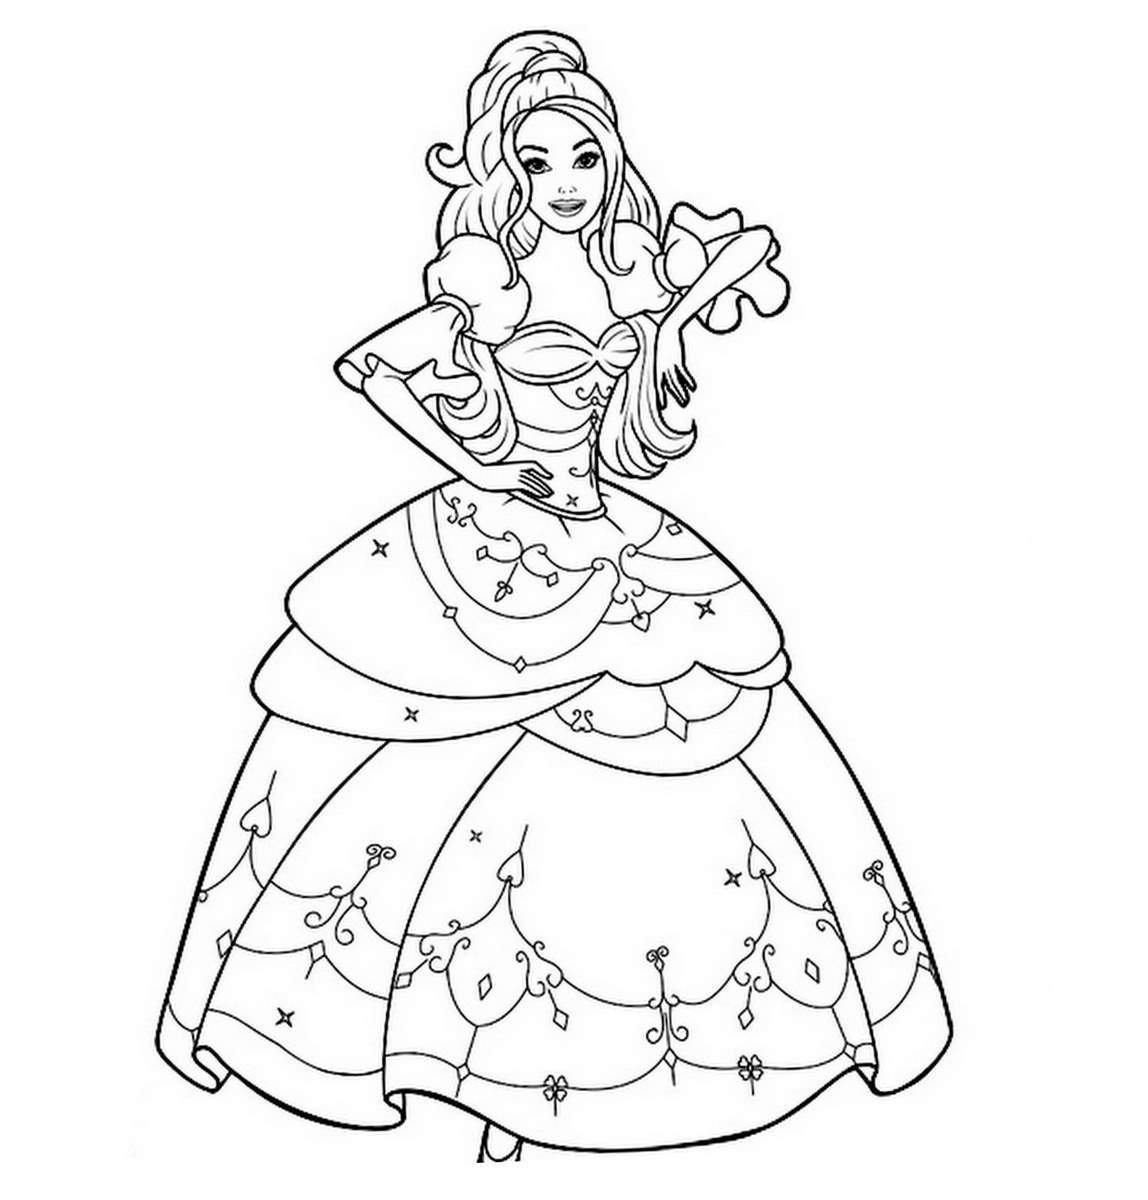 Barbie #27577 (Cartoons) – Free Printable Coloring Pages